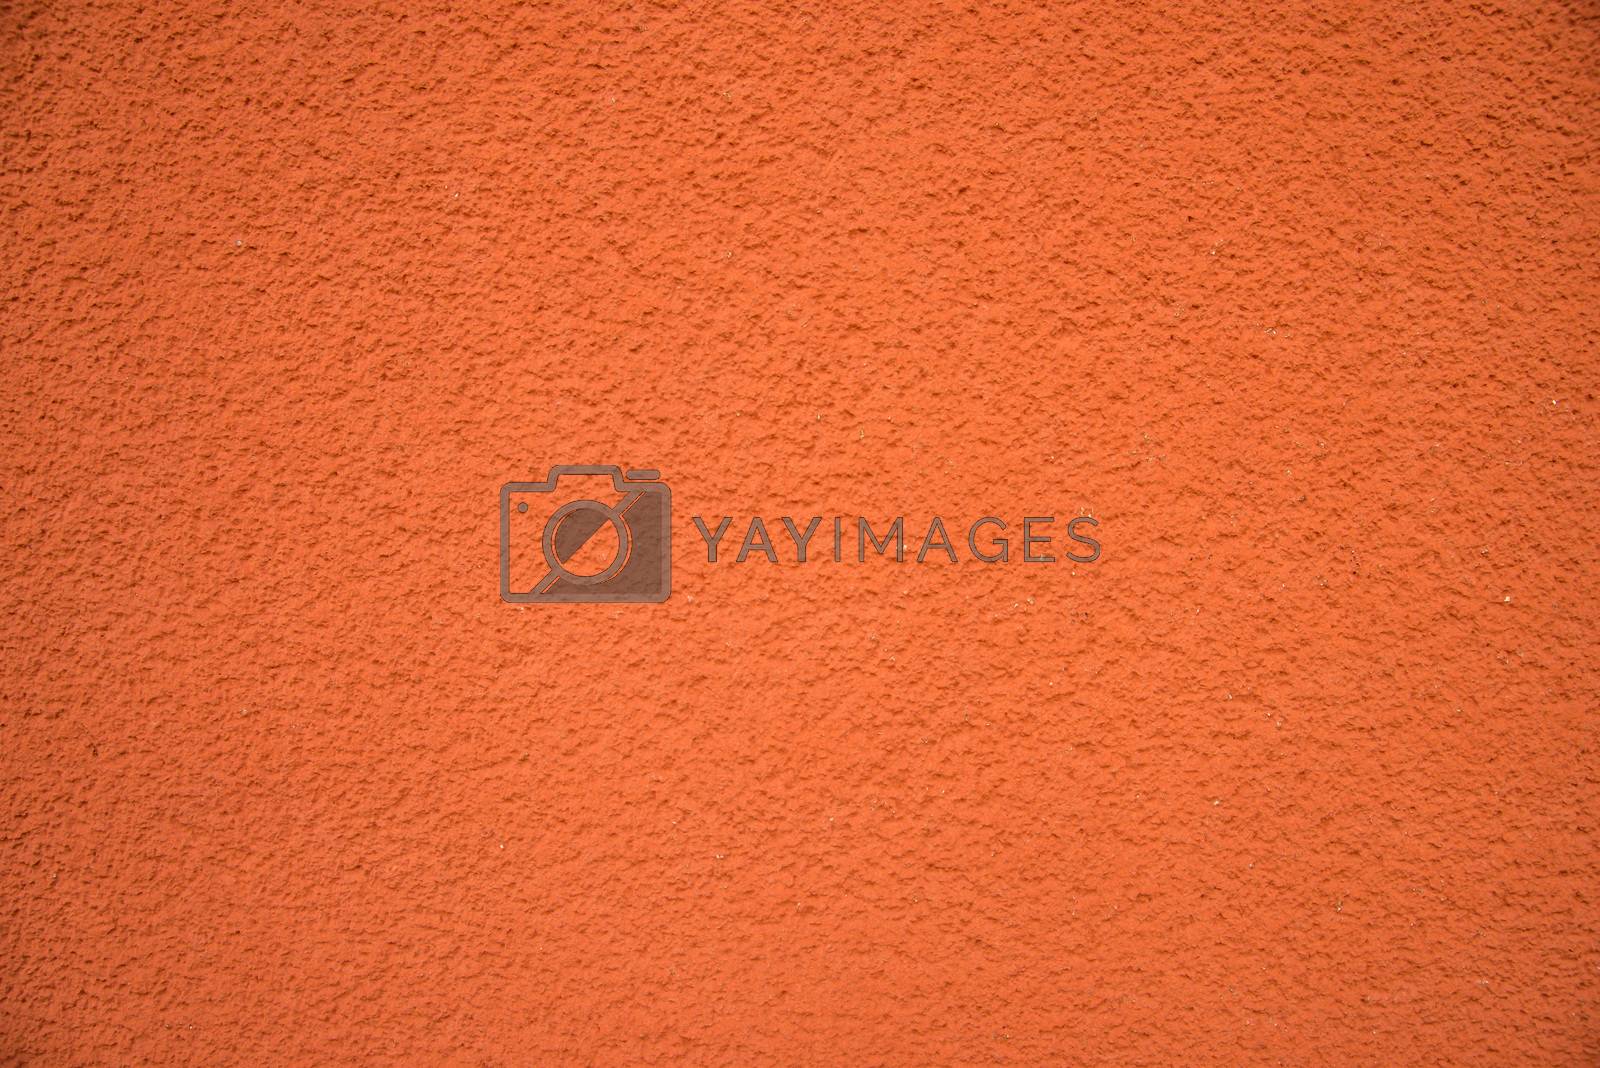 Royalty free image of wall of concrete with red coating by Jochen